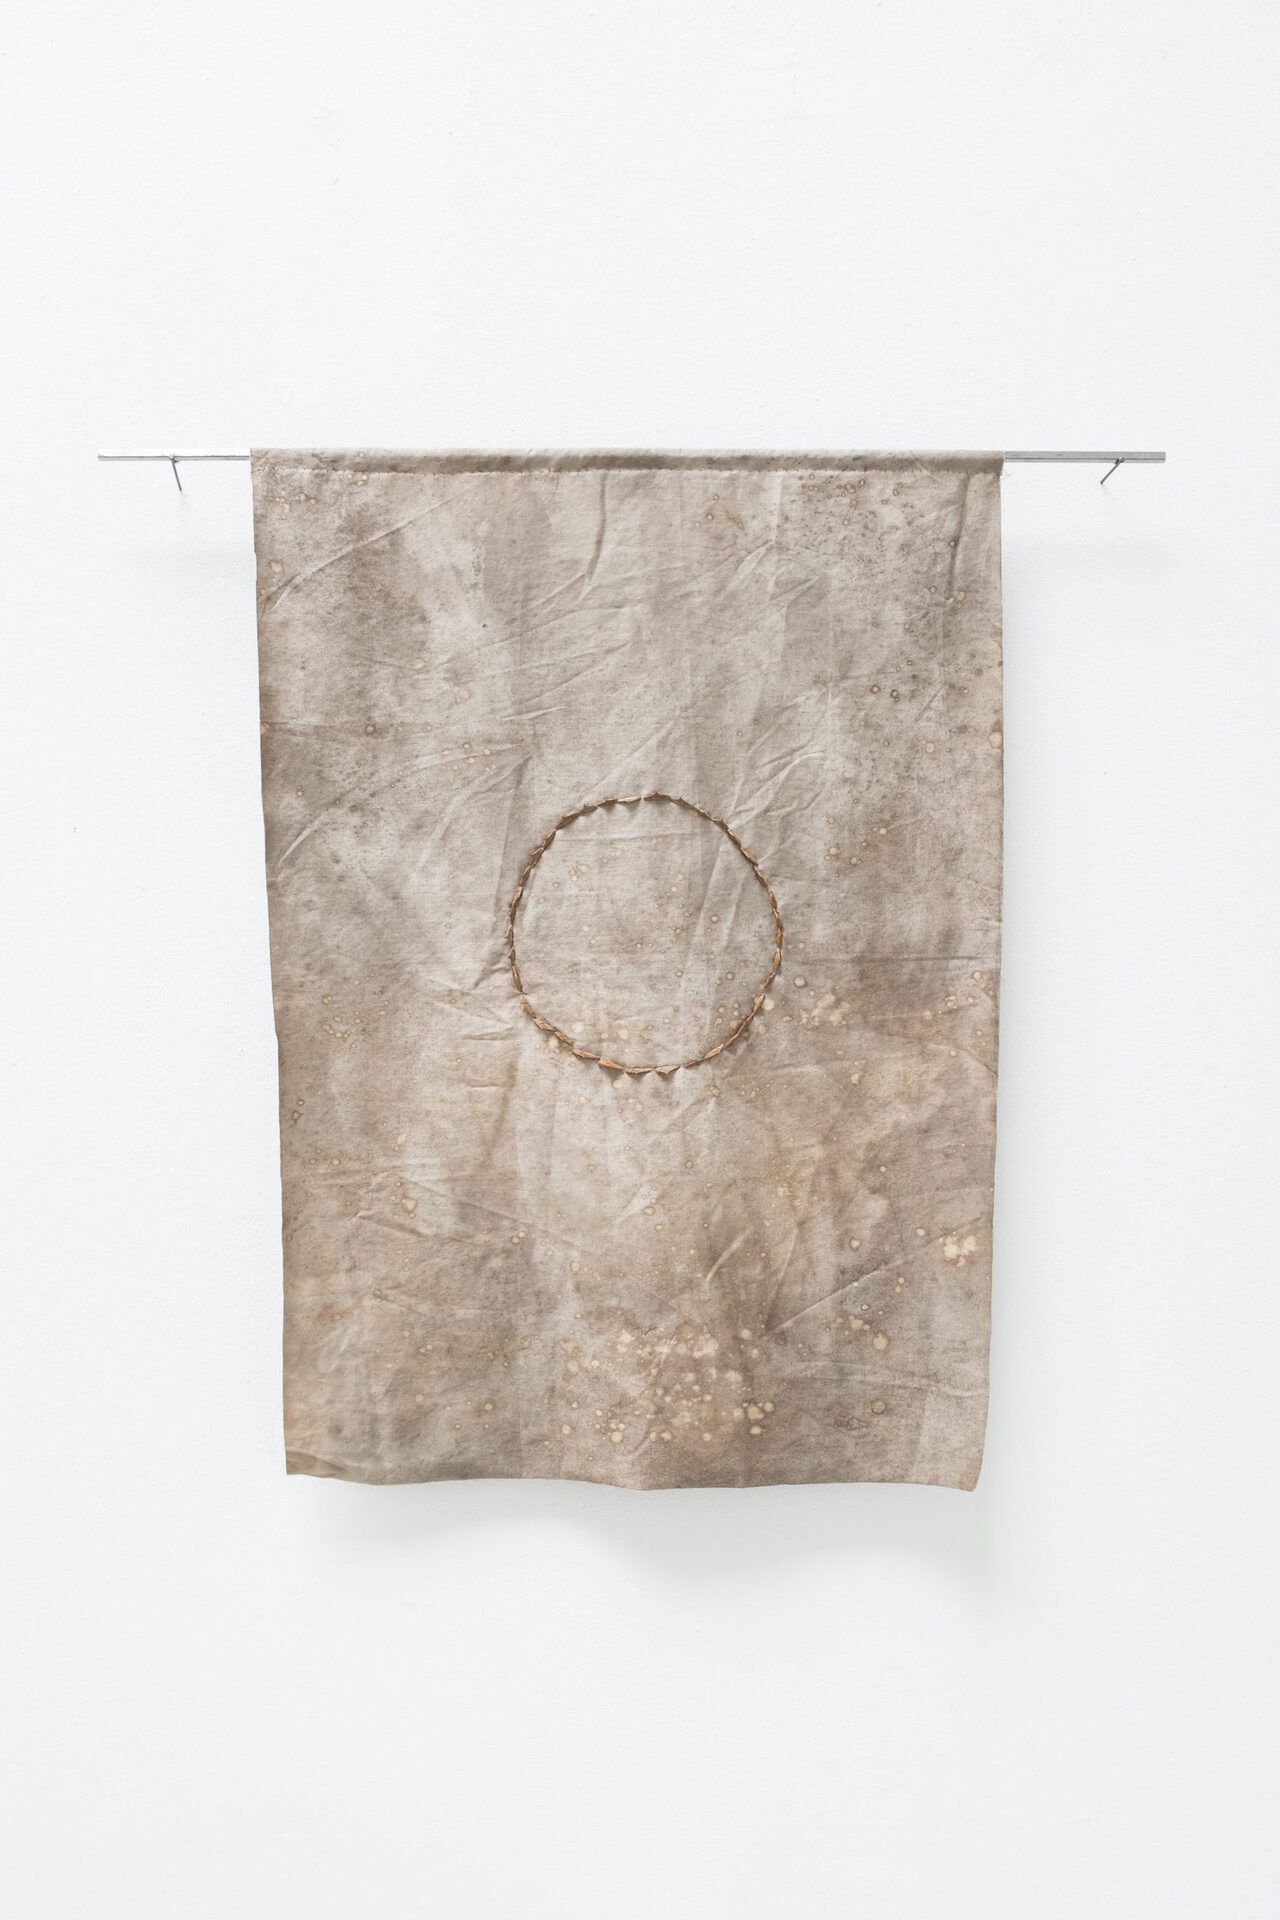 Katharina Gahlert,Angry Circle, 2022, Textile dyed with catechu and Rust, Rose Thorns, Yarn, 67 x 47 cm